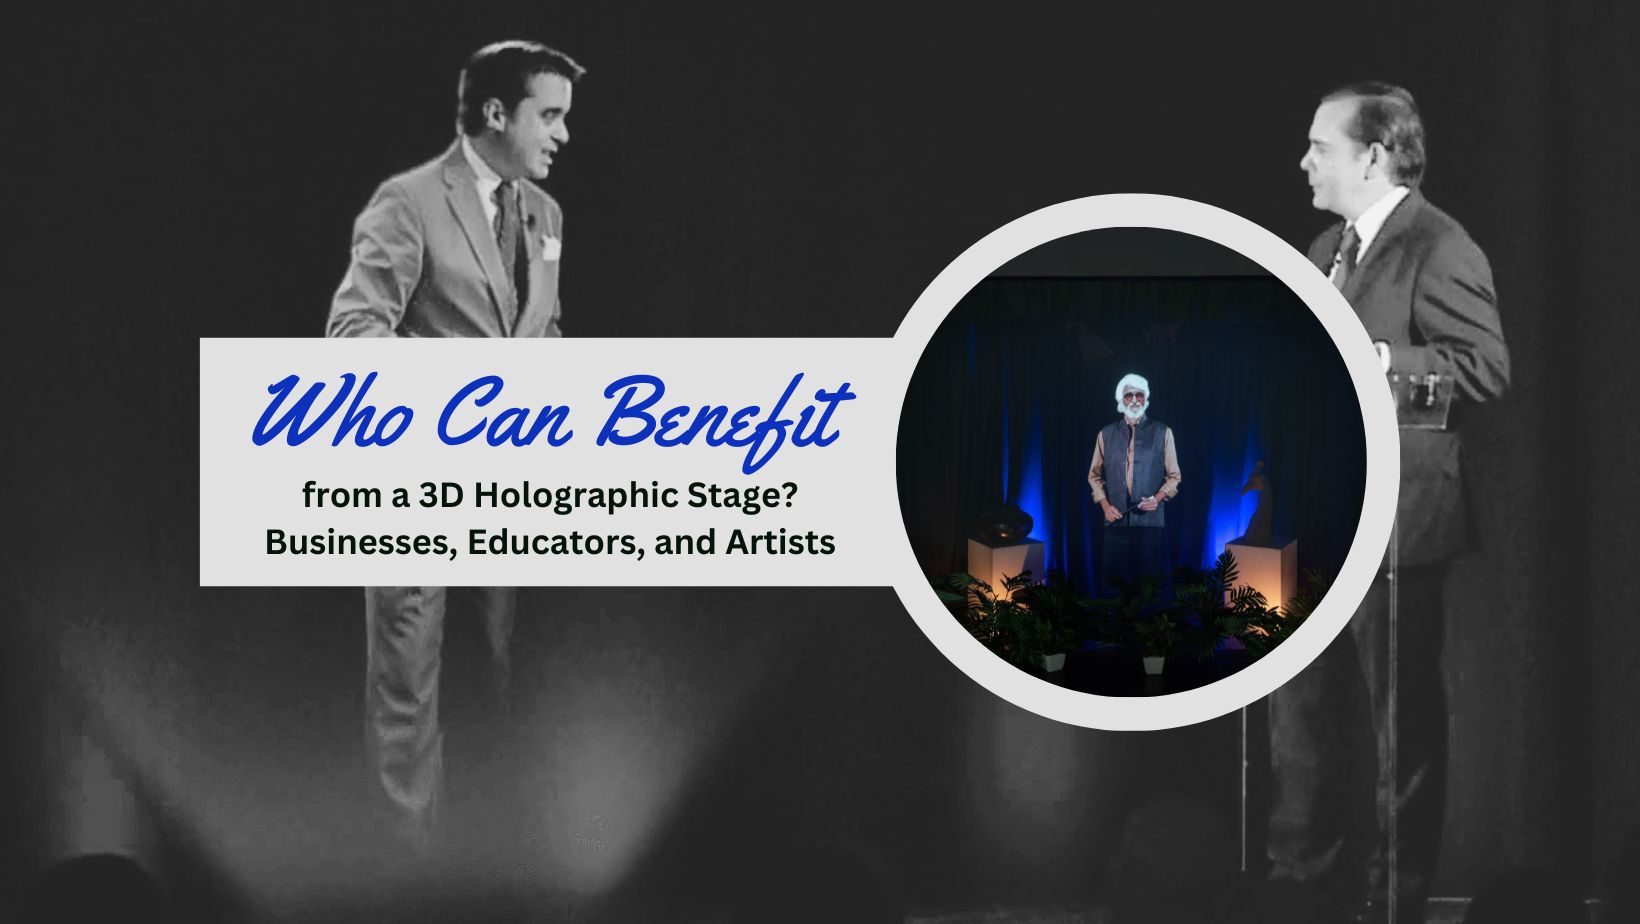 Who Can Benefit from a 3D Holographic Stage? Businesses, Educators, and Artists